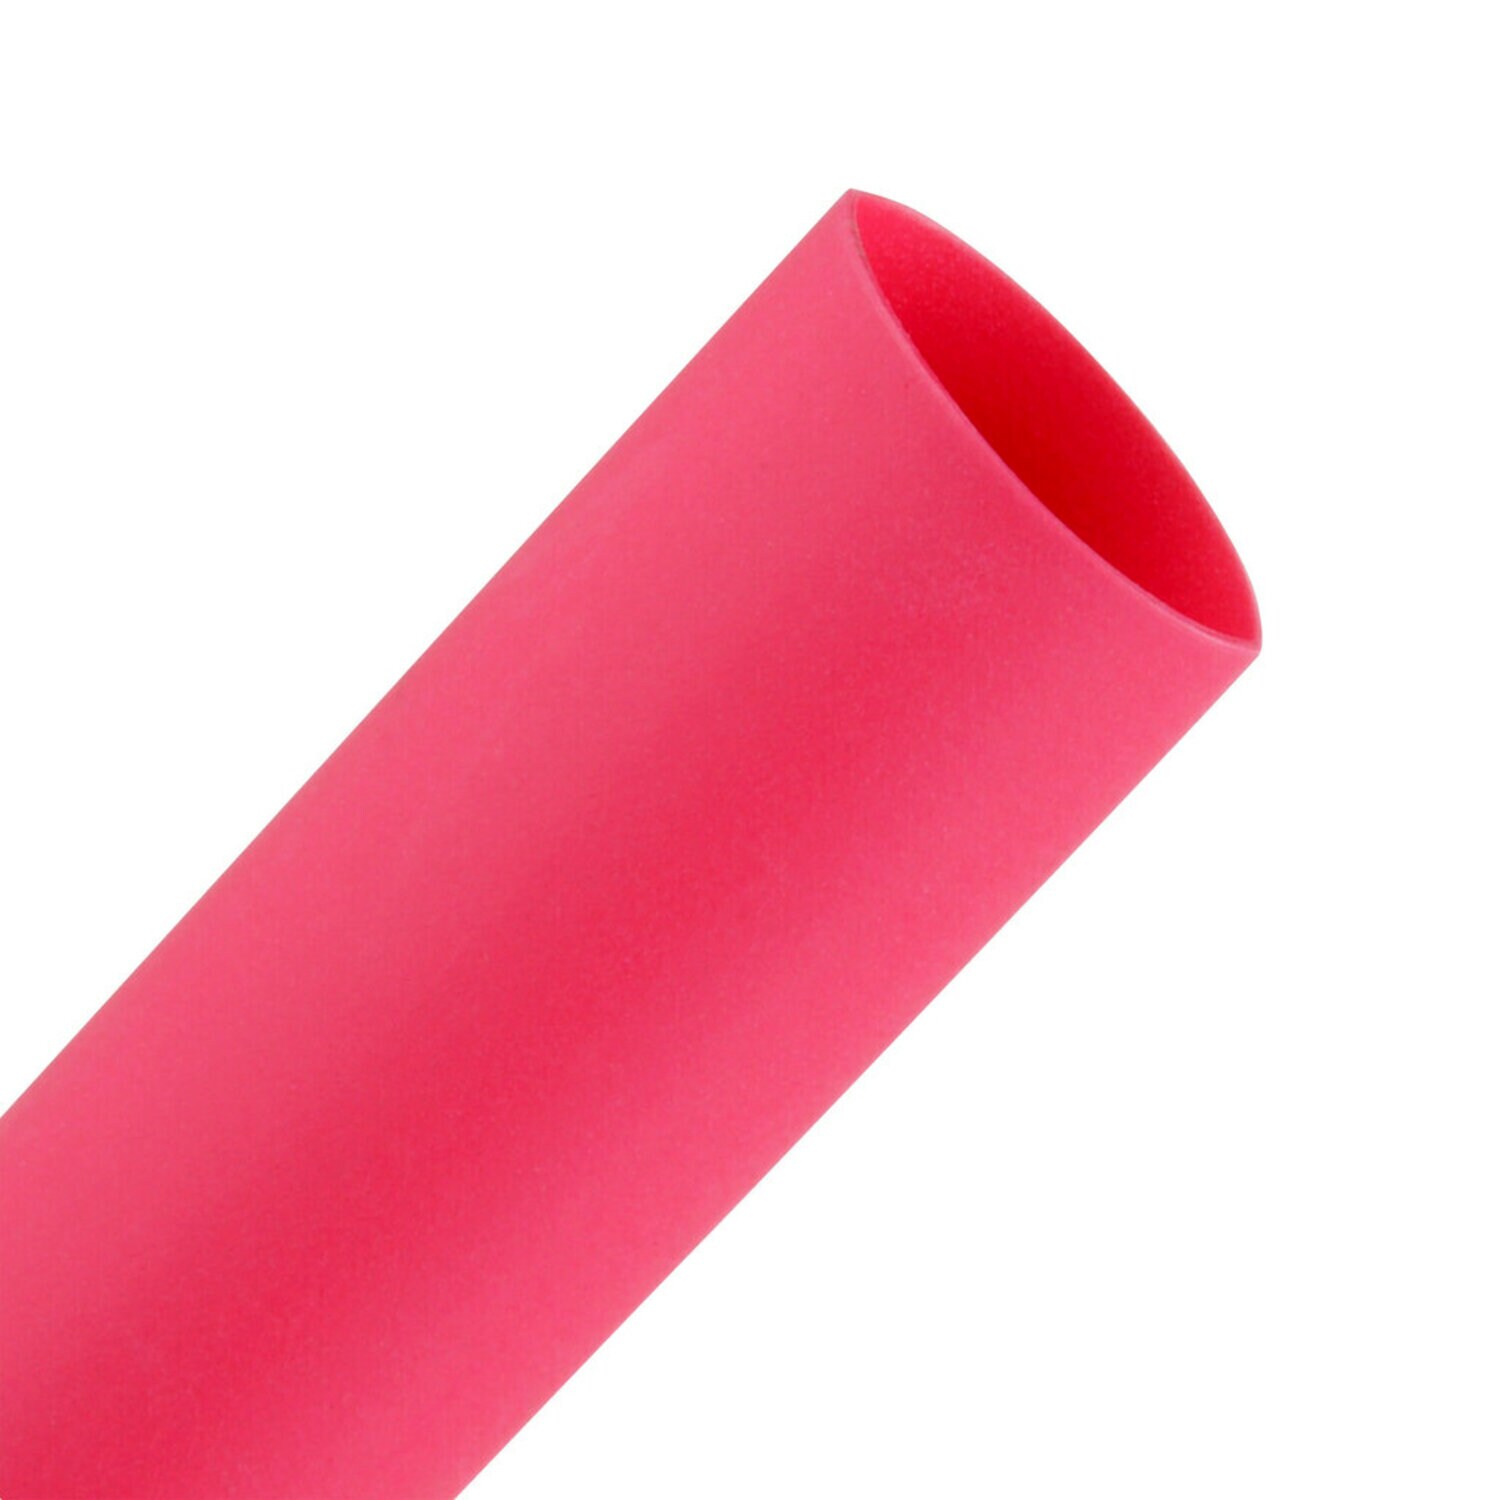 7010320996 - 3M Heat Shrink Thin-Wall Tubing FP-301-3/8-48"-Red-125 Pcs, 48 in
Length sticks, 125 pieces/case